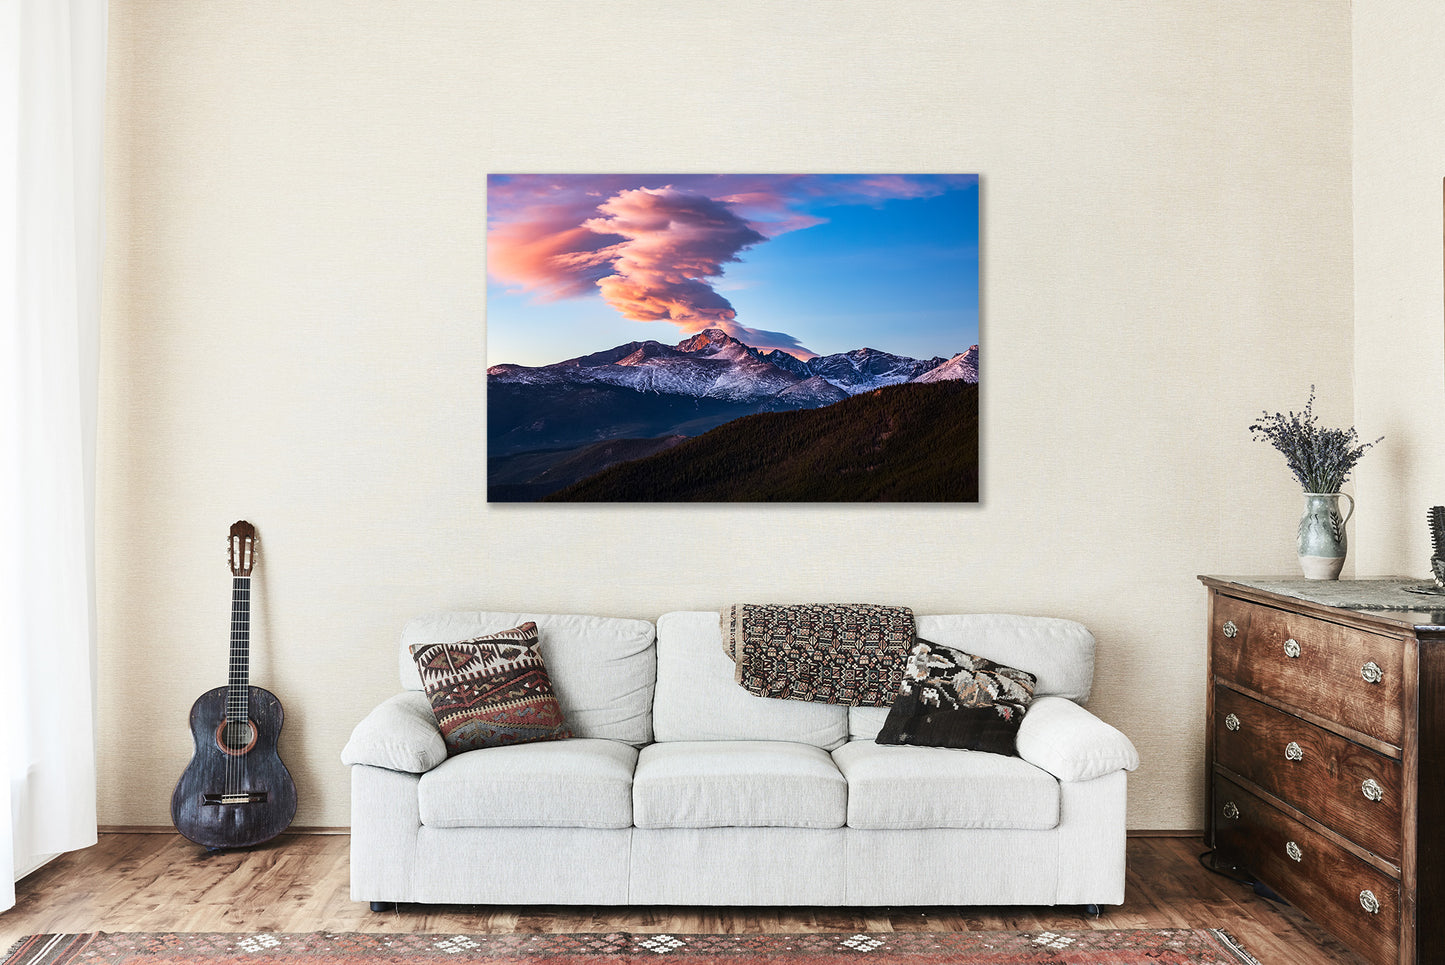 Rocky Mountain National Park Metal Print (Ready to Hang) Photo on Aluminum of Longs Peak with Cloud Rising Above at Sunrise in Colorado Western Wall Art Nature Decor